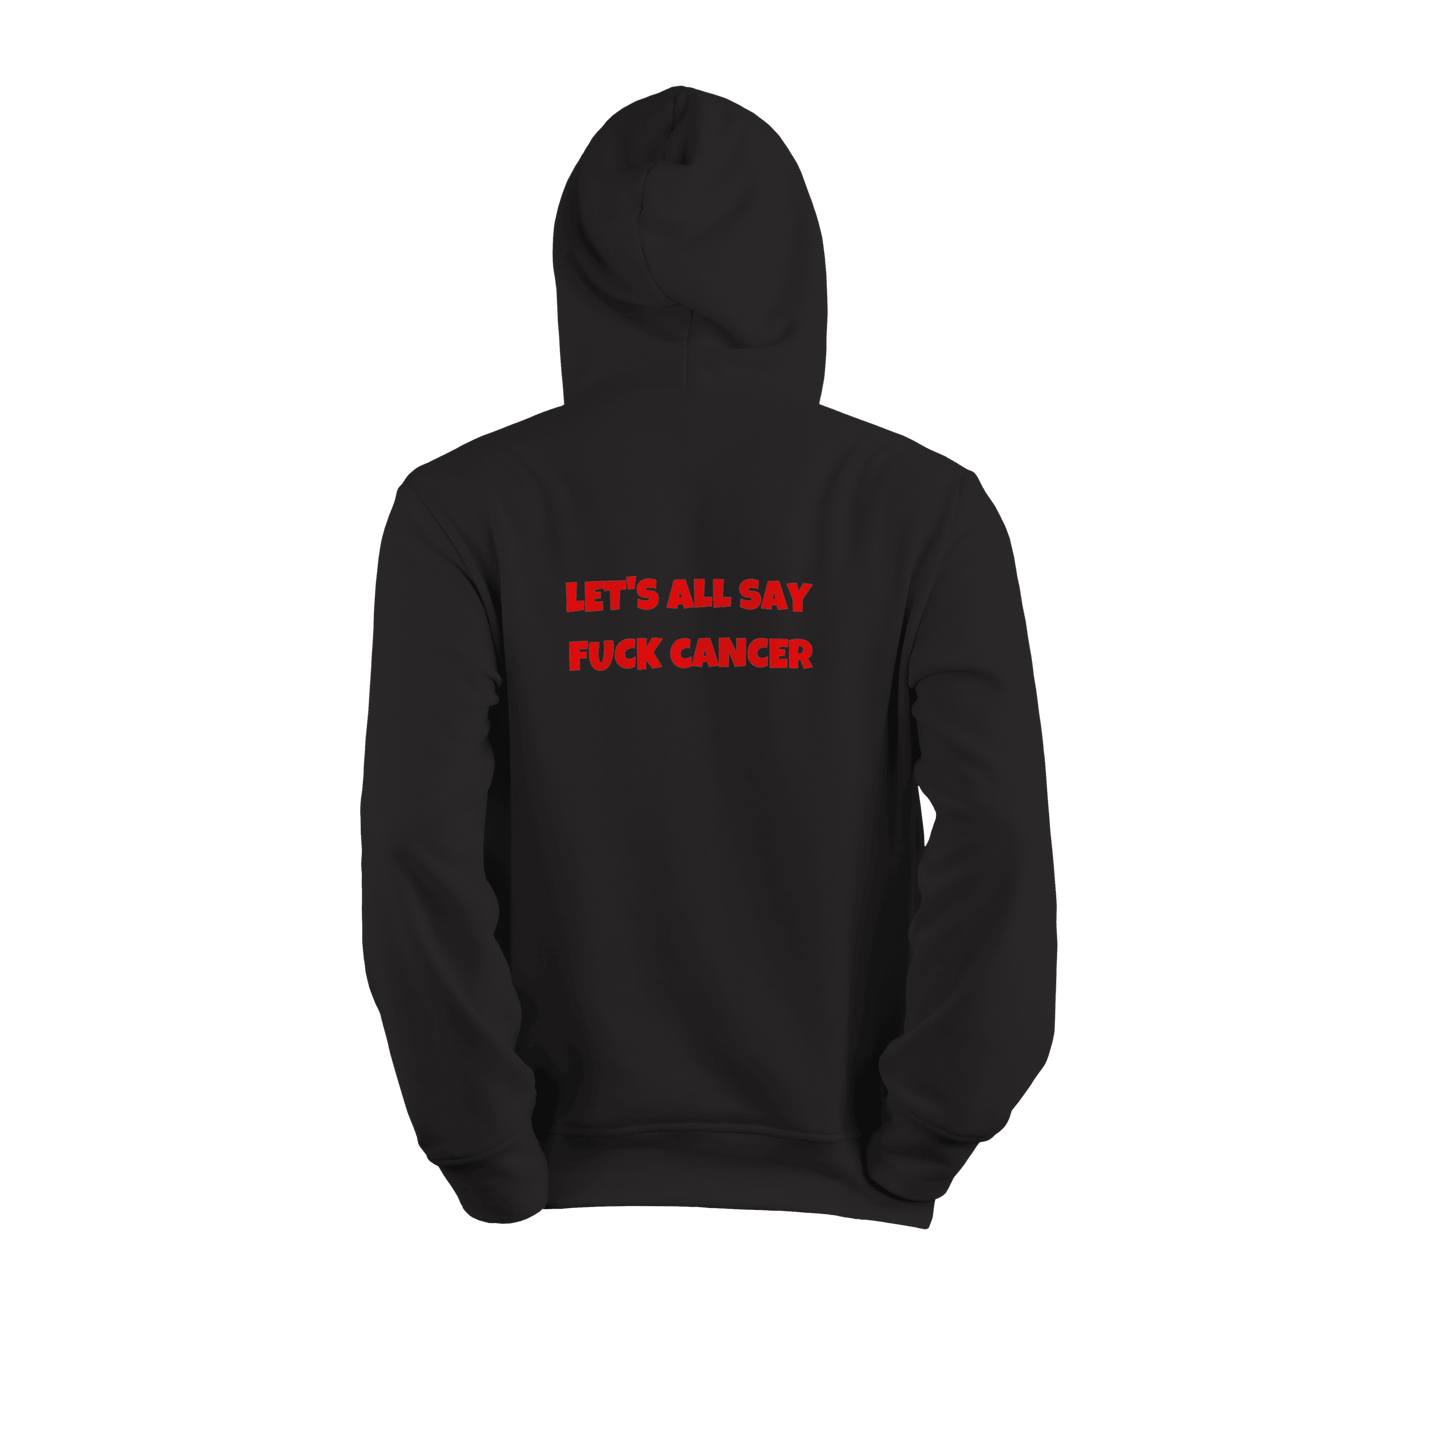 NoGunz Hoodie: Let's all say Fuck Cancer